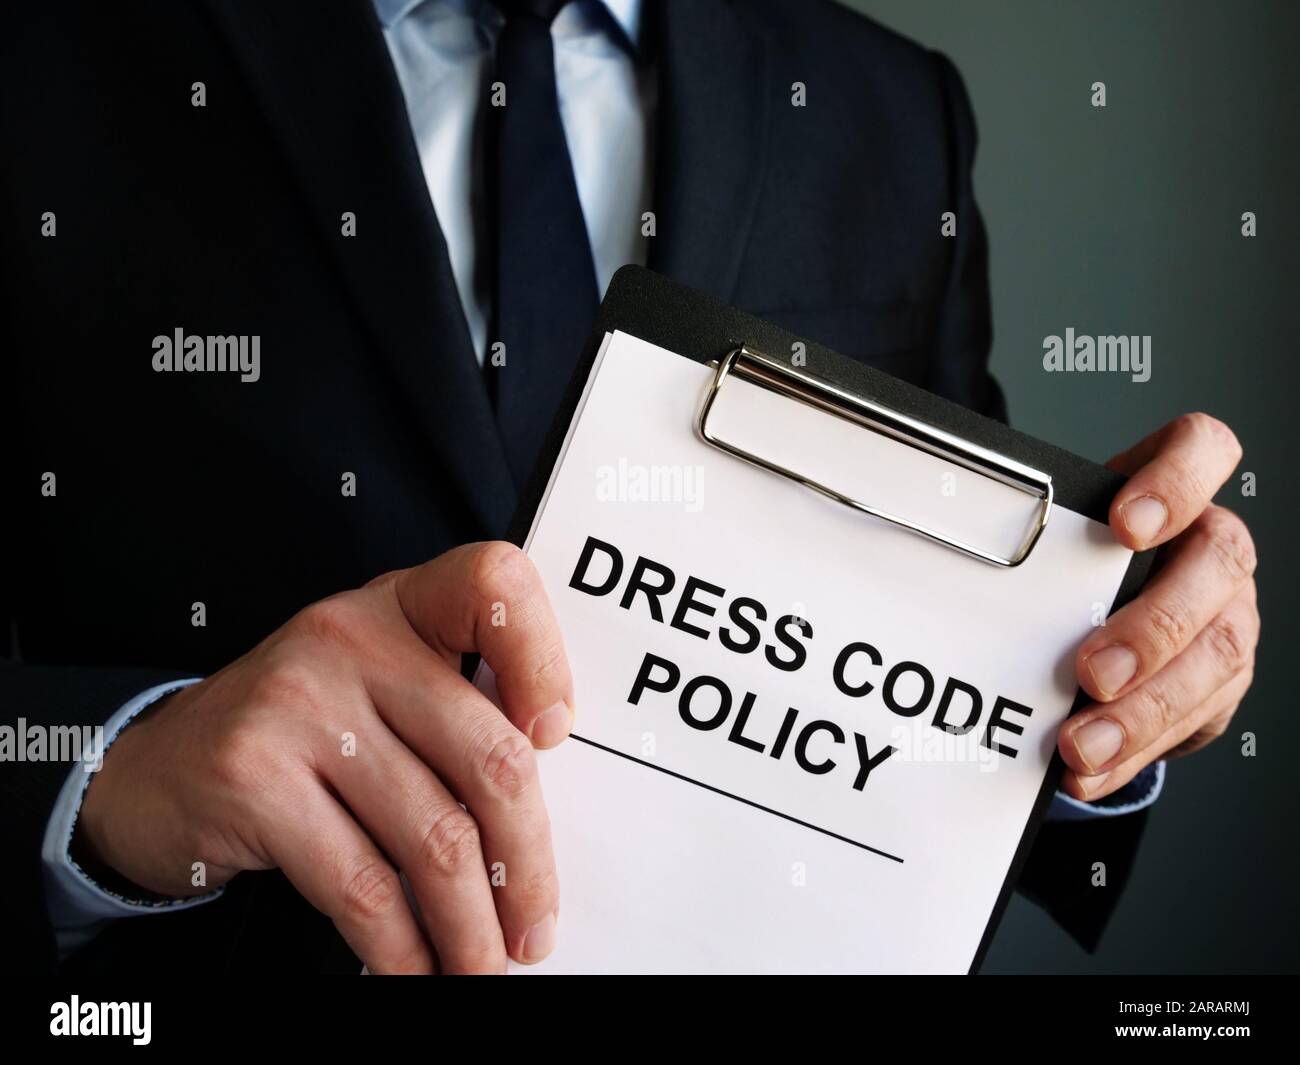 Manager is holding Dress code policy. Stock Photo